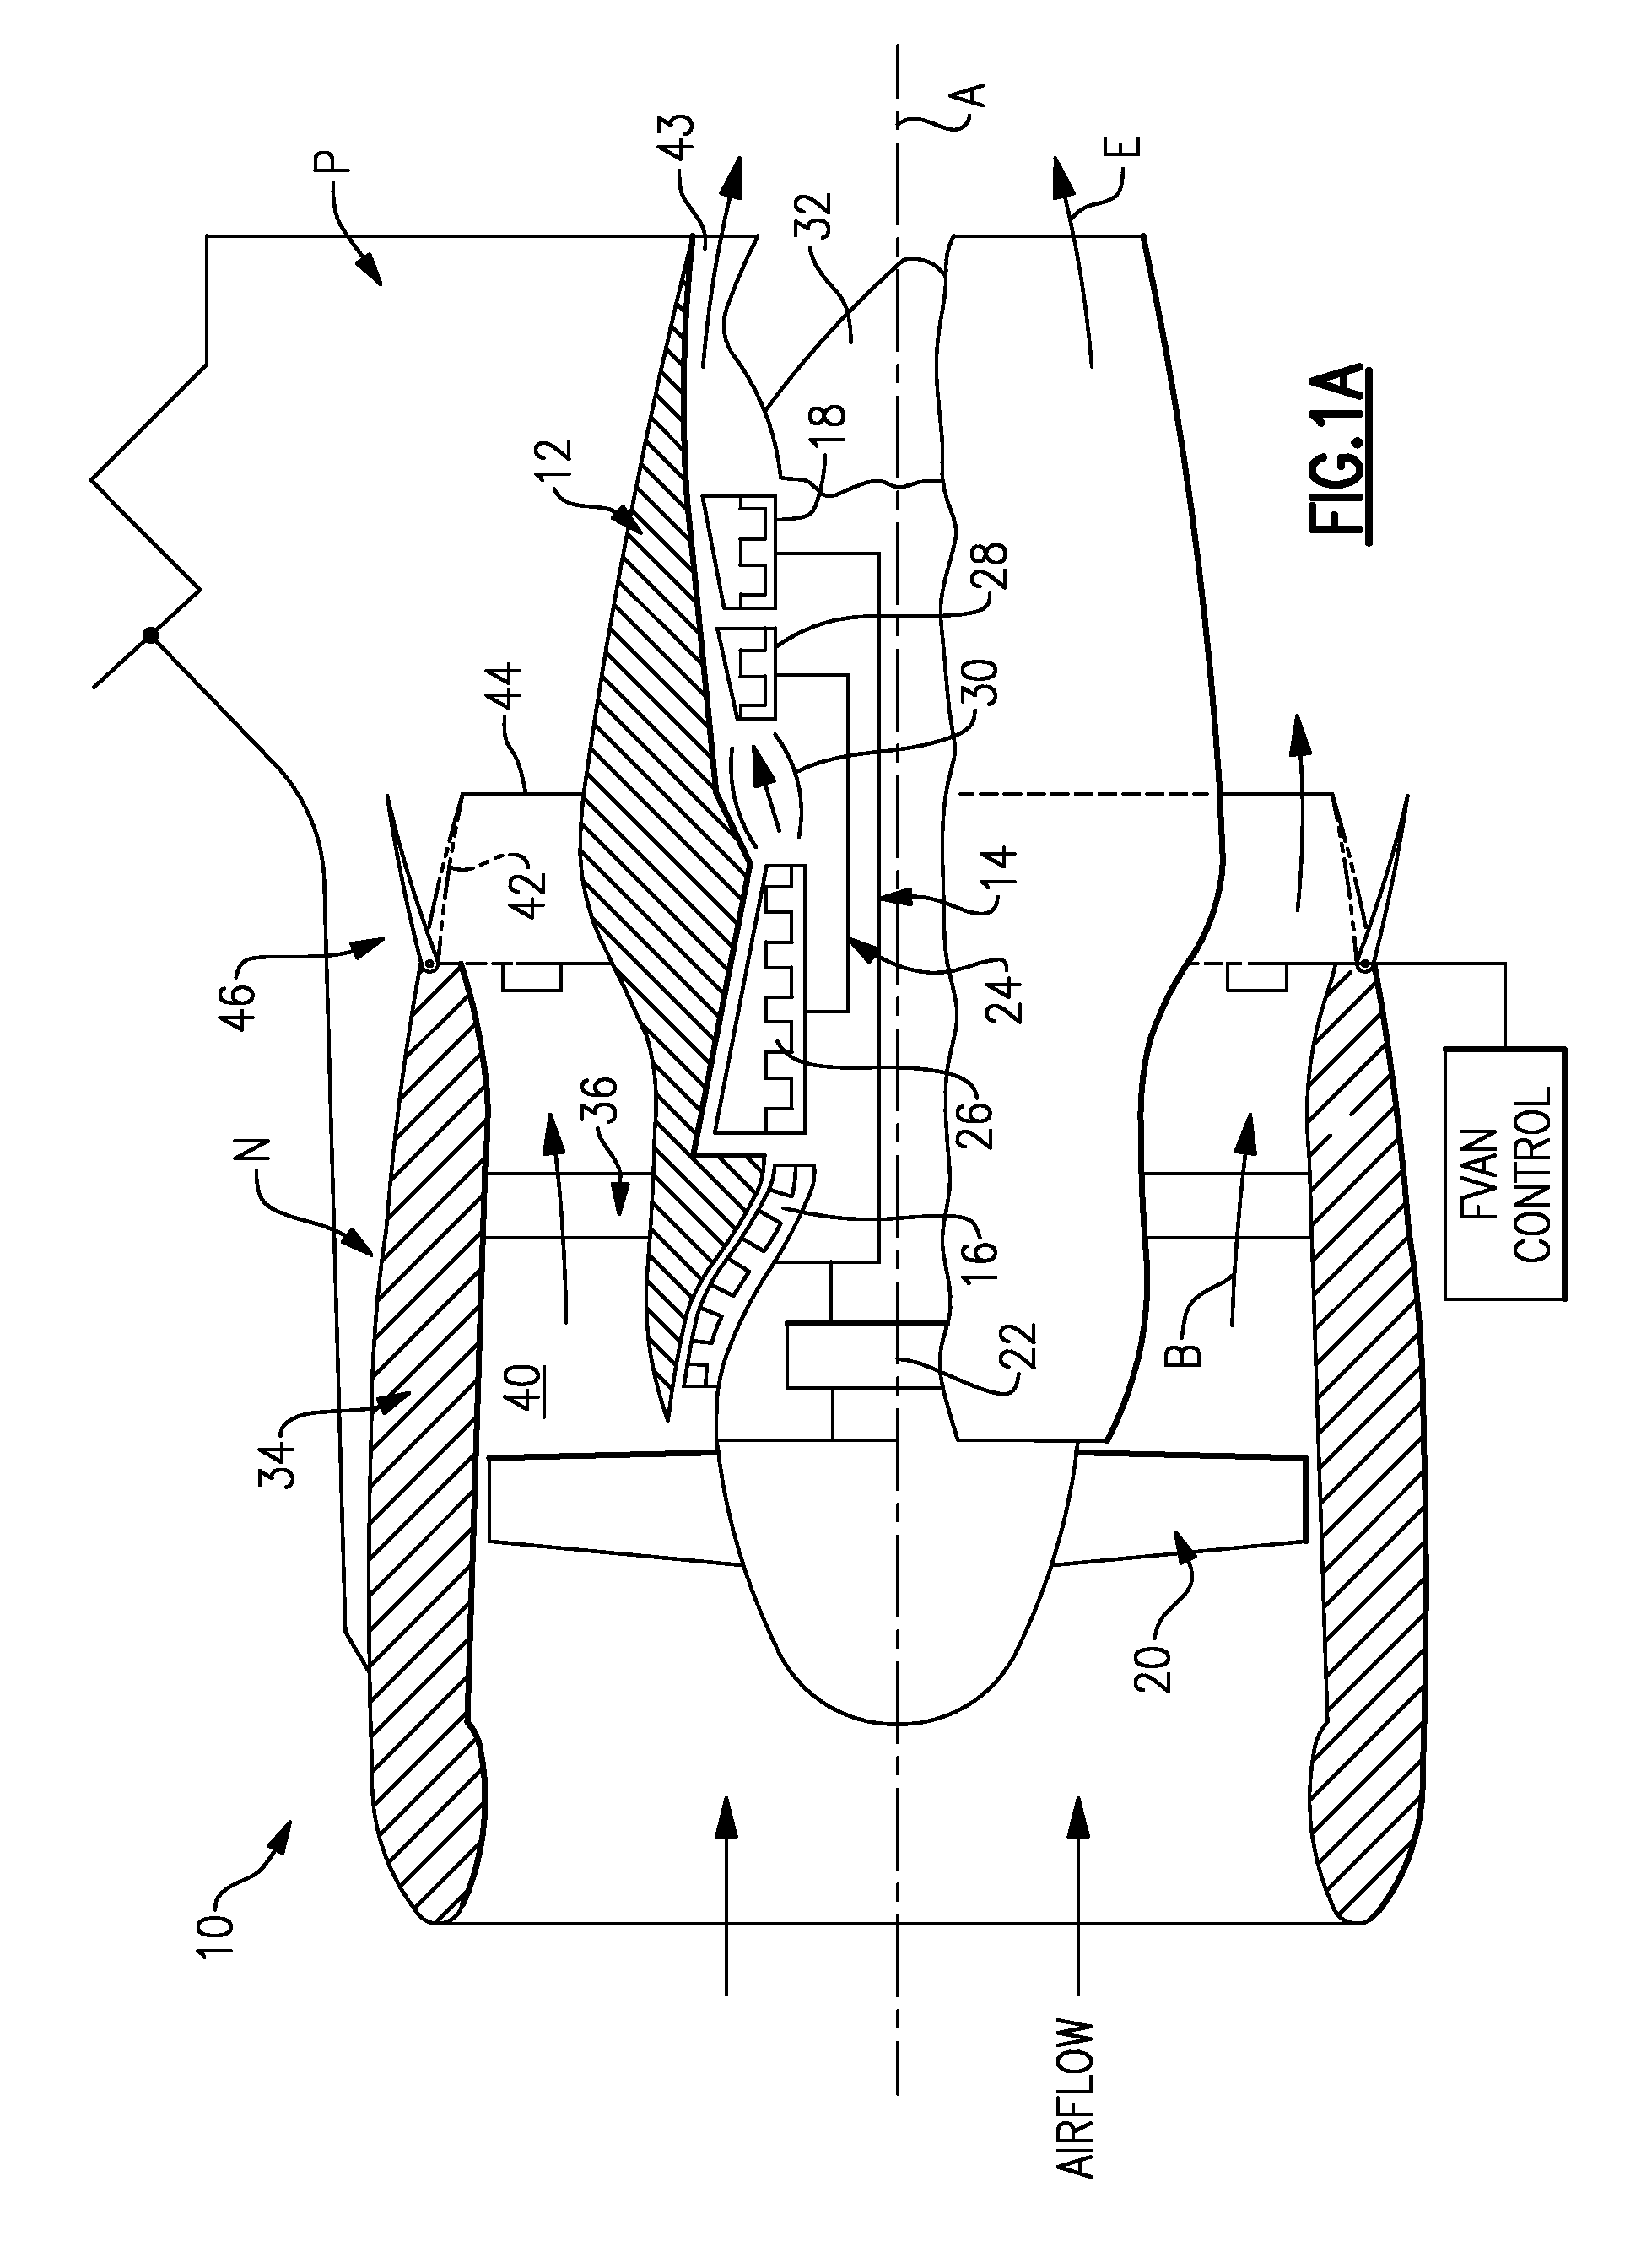 Fan variable area nozzle for a gas turbine engine fan nacelle with drive ring actuation system